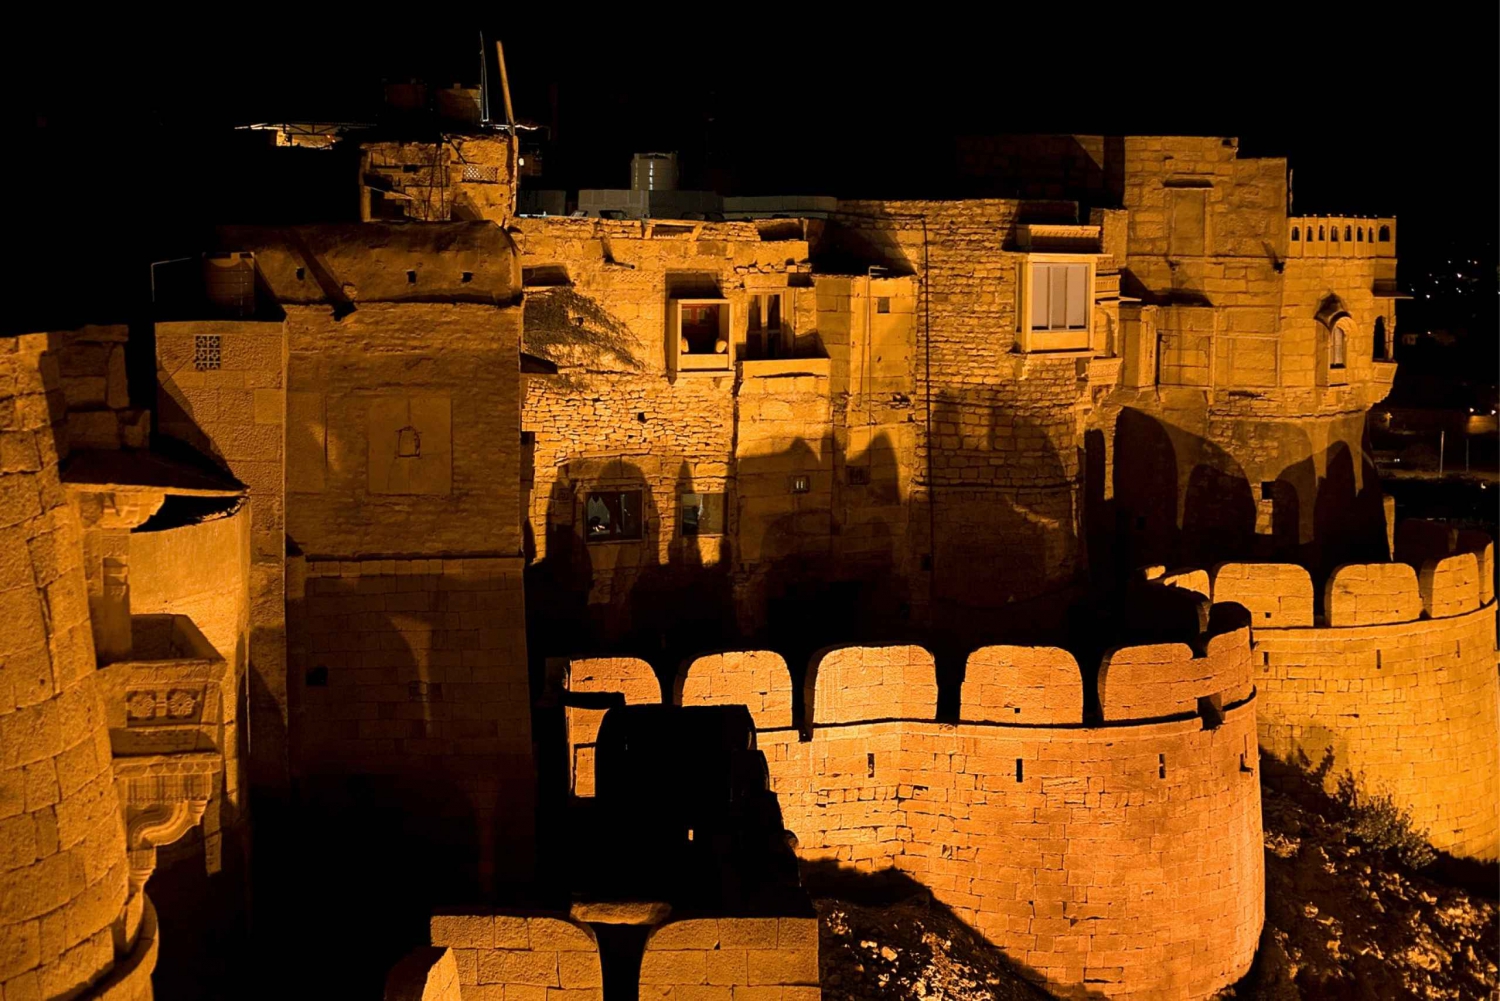 Experience Jaisalmer at Night (2 Hour Guided Walking Tour)